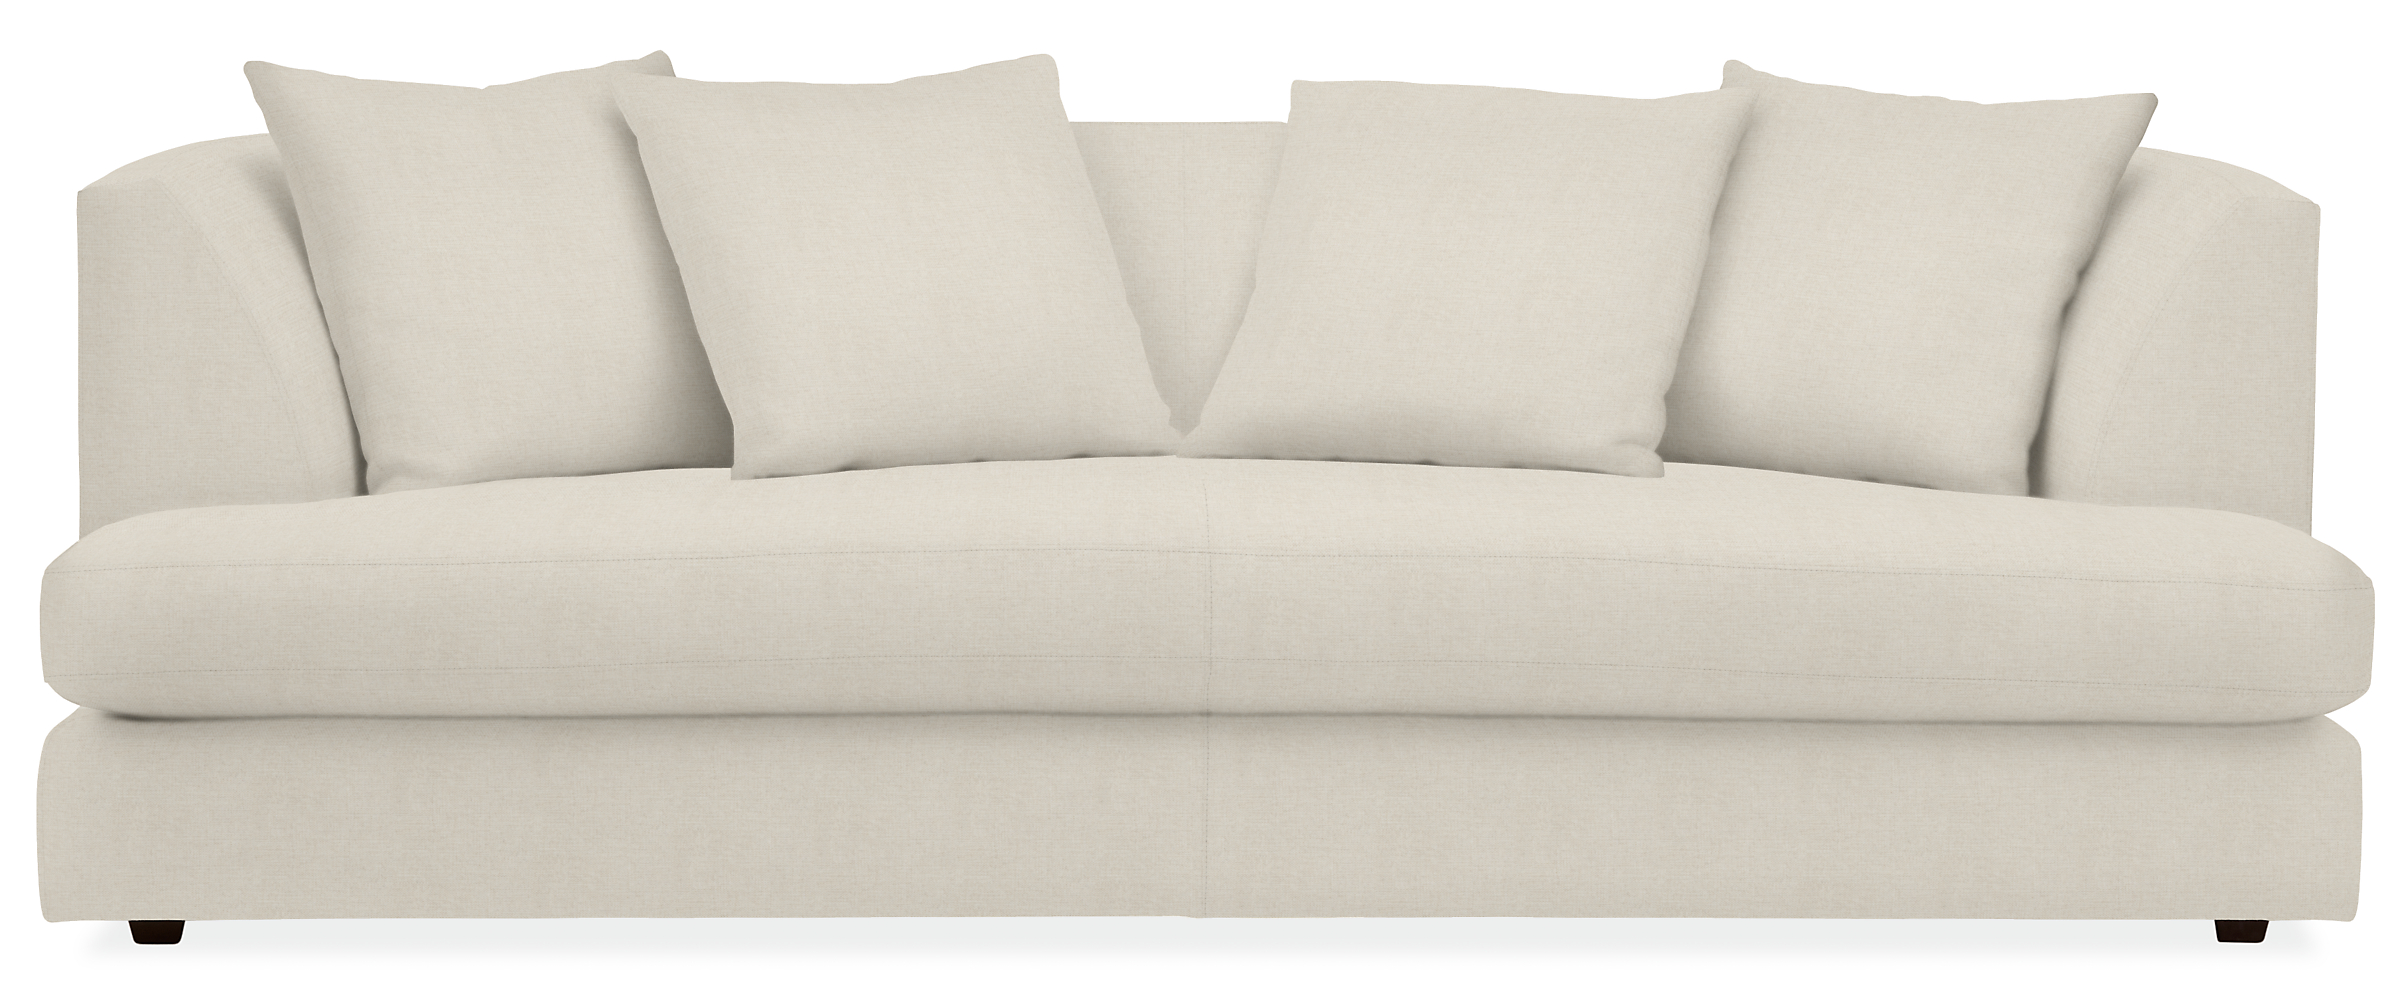 Astaire Bench Cushion Sofas - Modern Living Room Furniture - Room